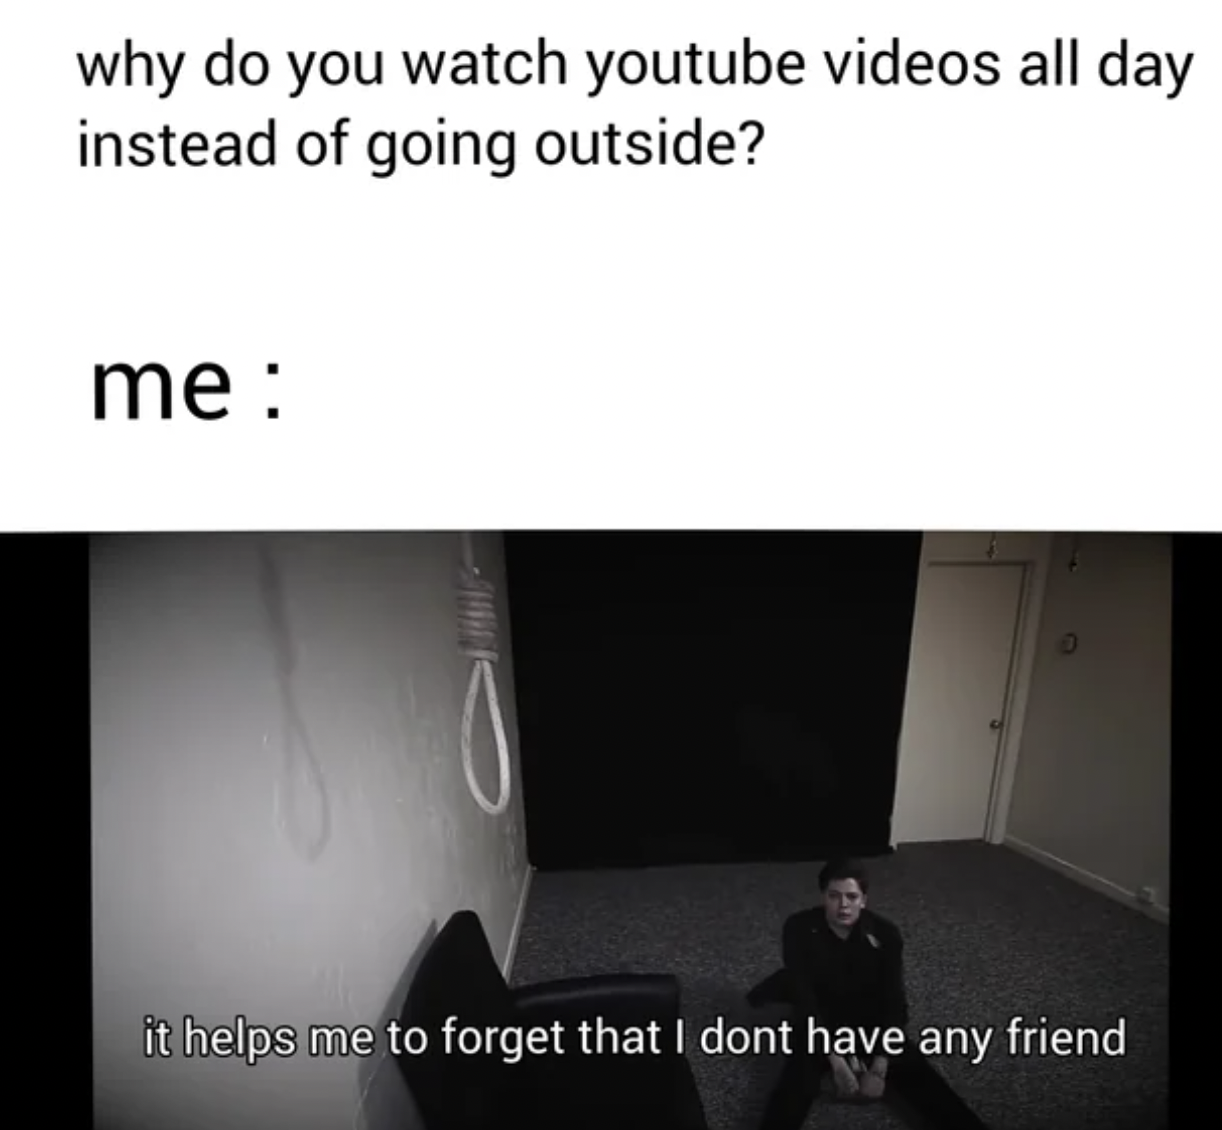 presentation - why do you watch youtube videos all day instead of going outside? me Sup it helps me to forget that I dont have any friend